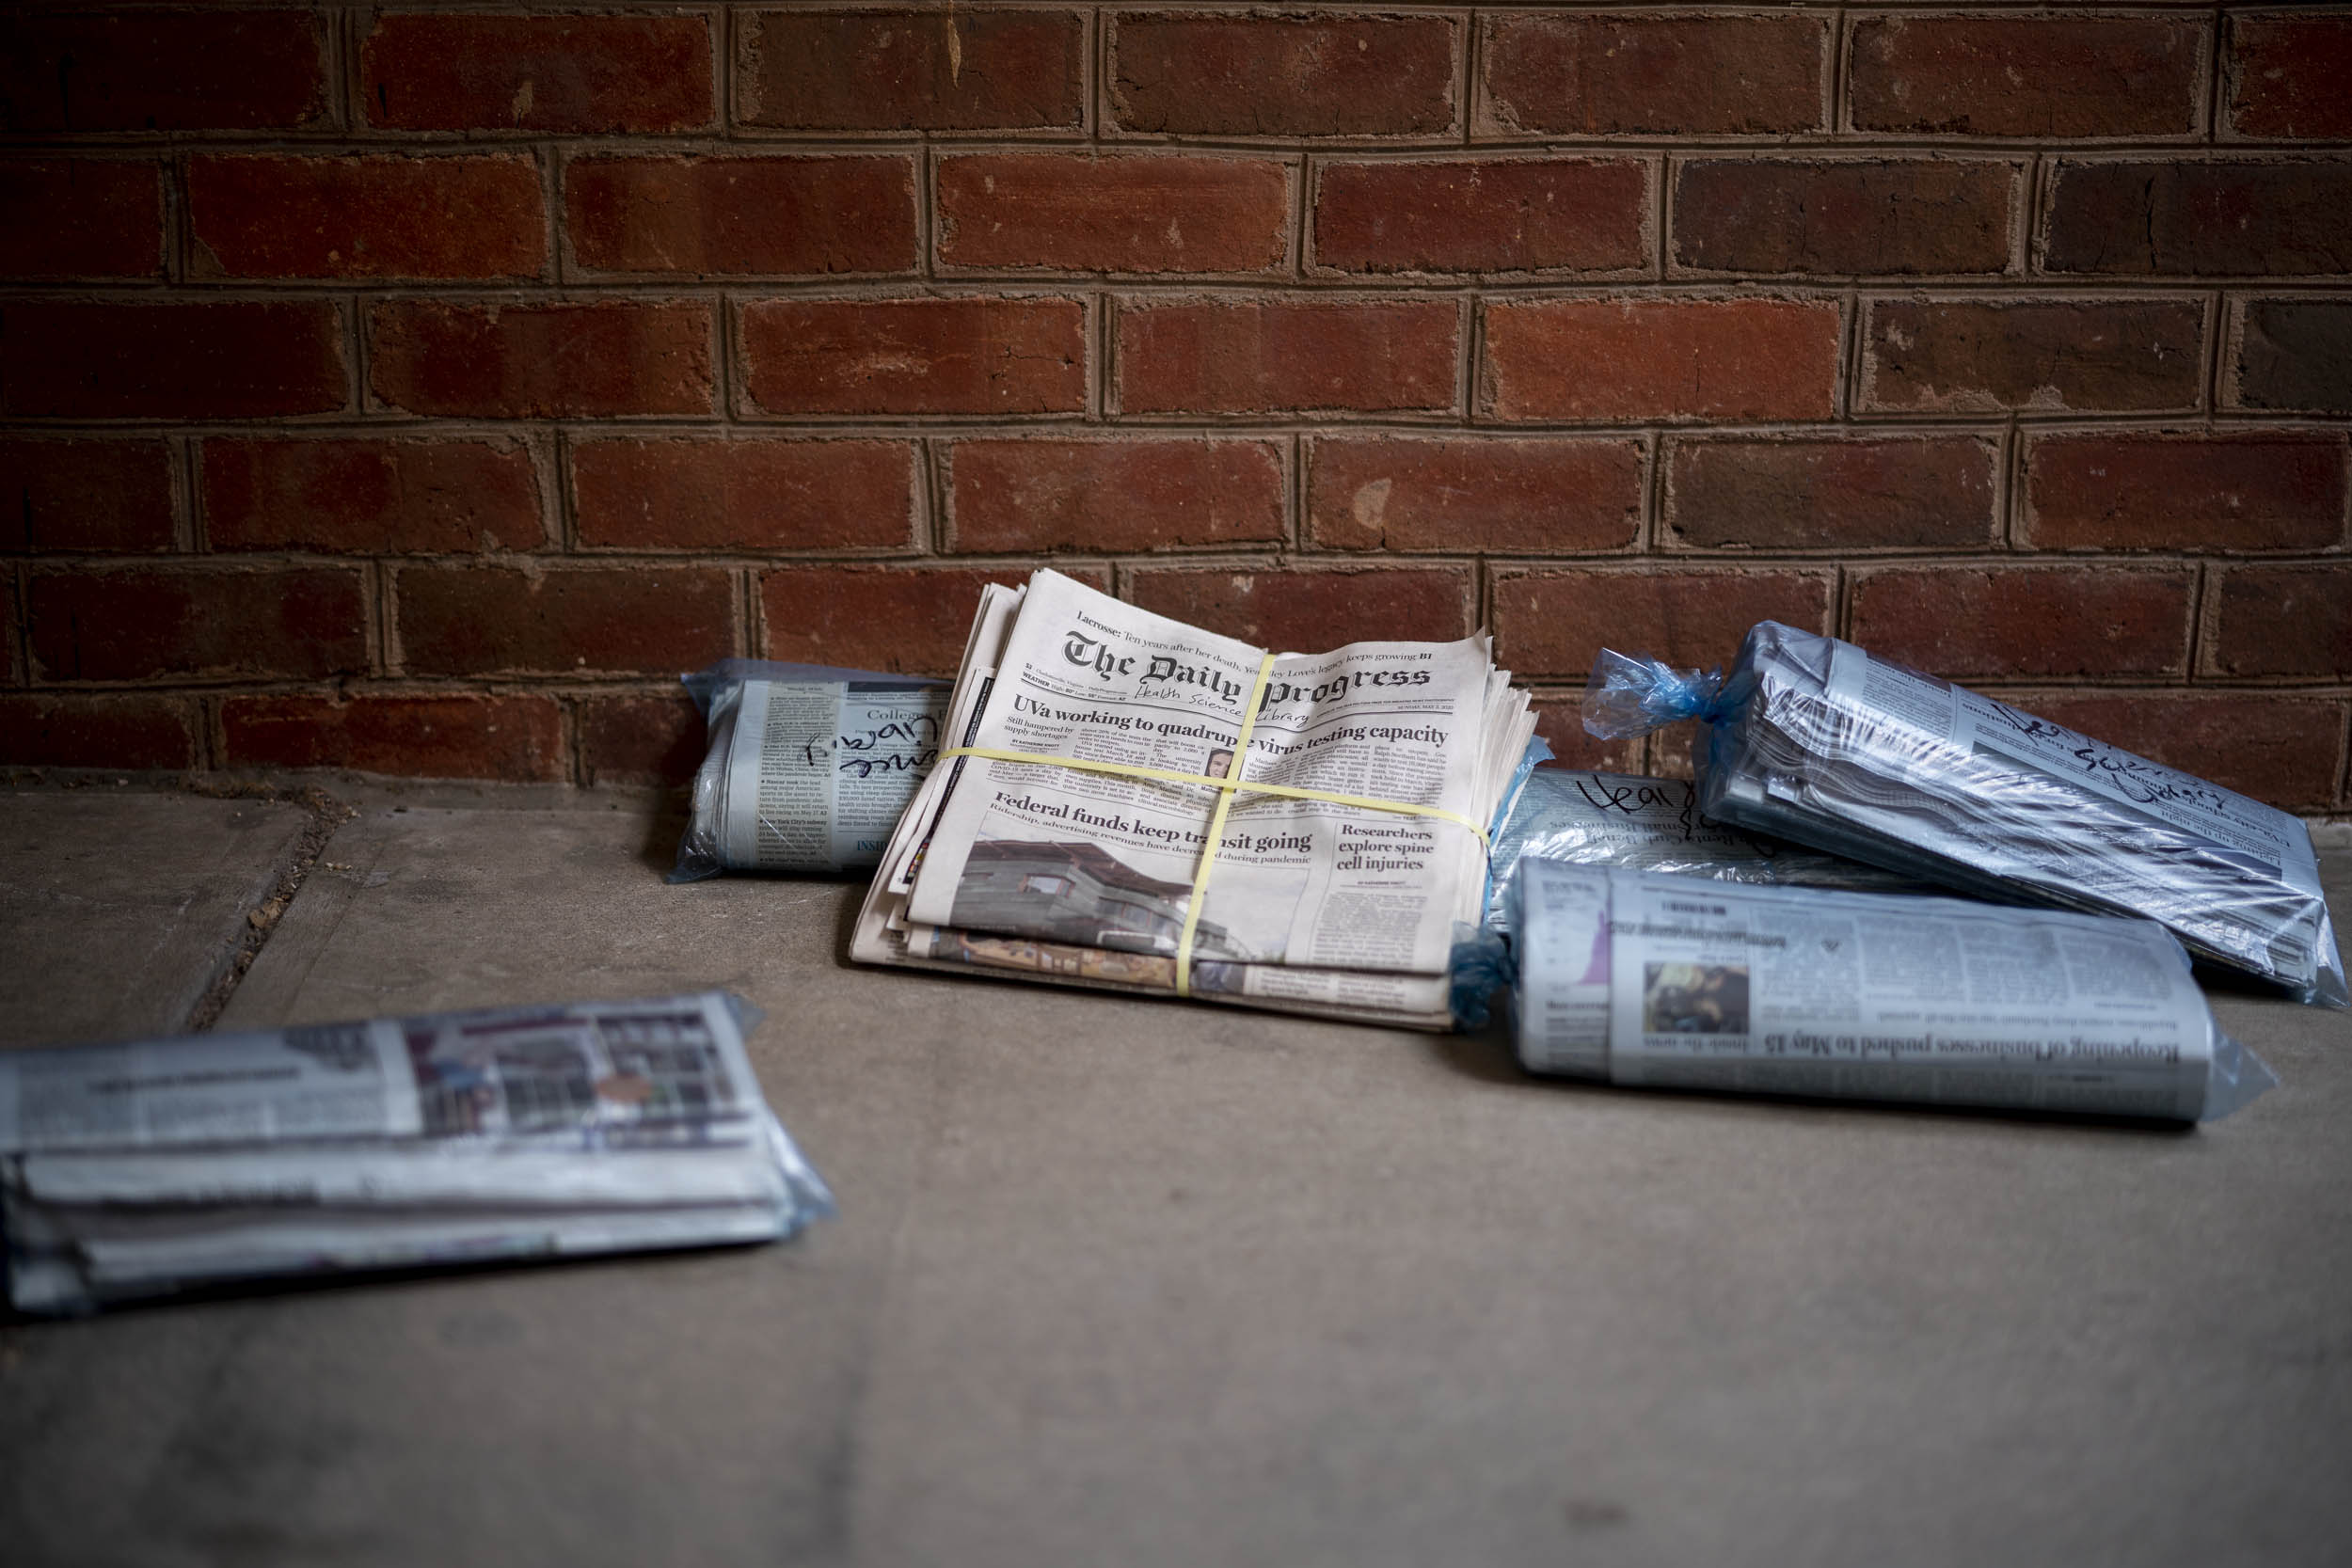 Stack of uncollected Newspapers on a sidewalk next to a brick wall